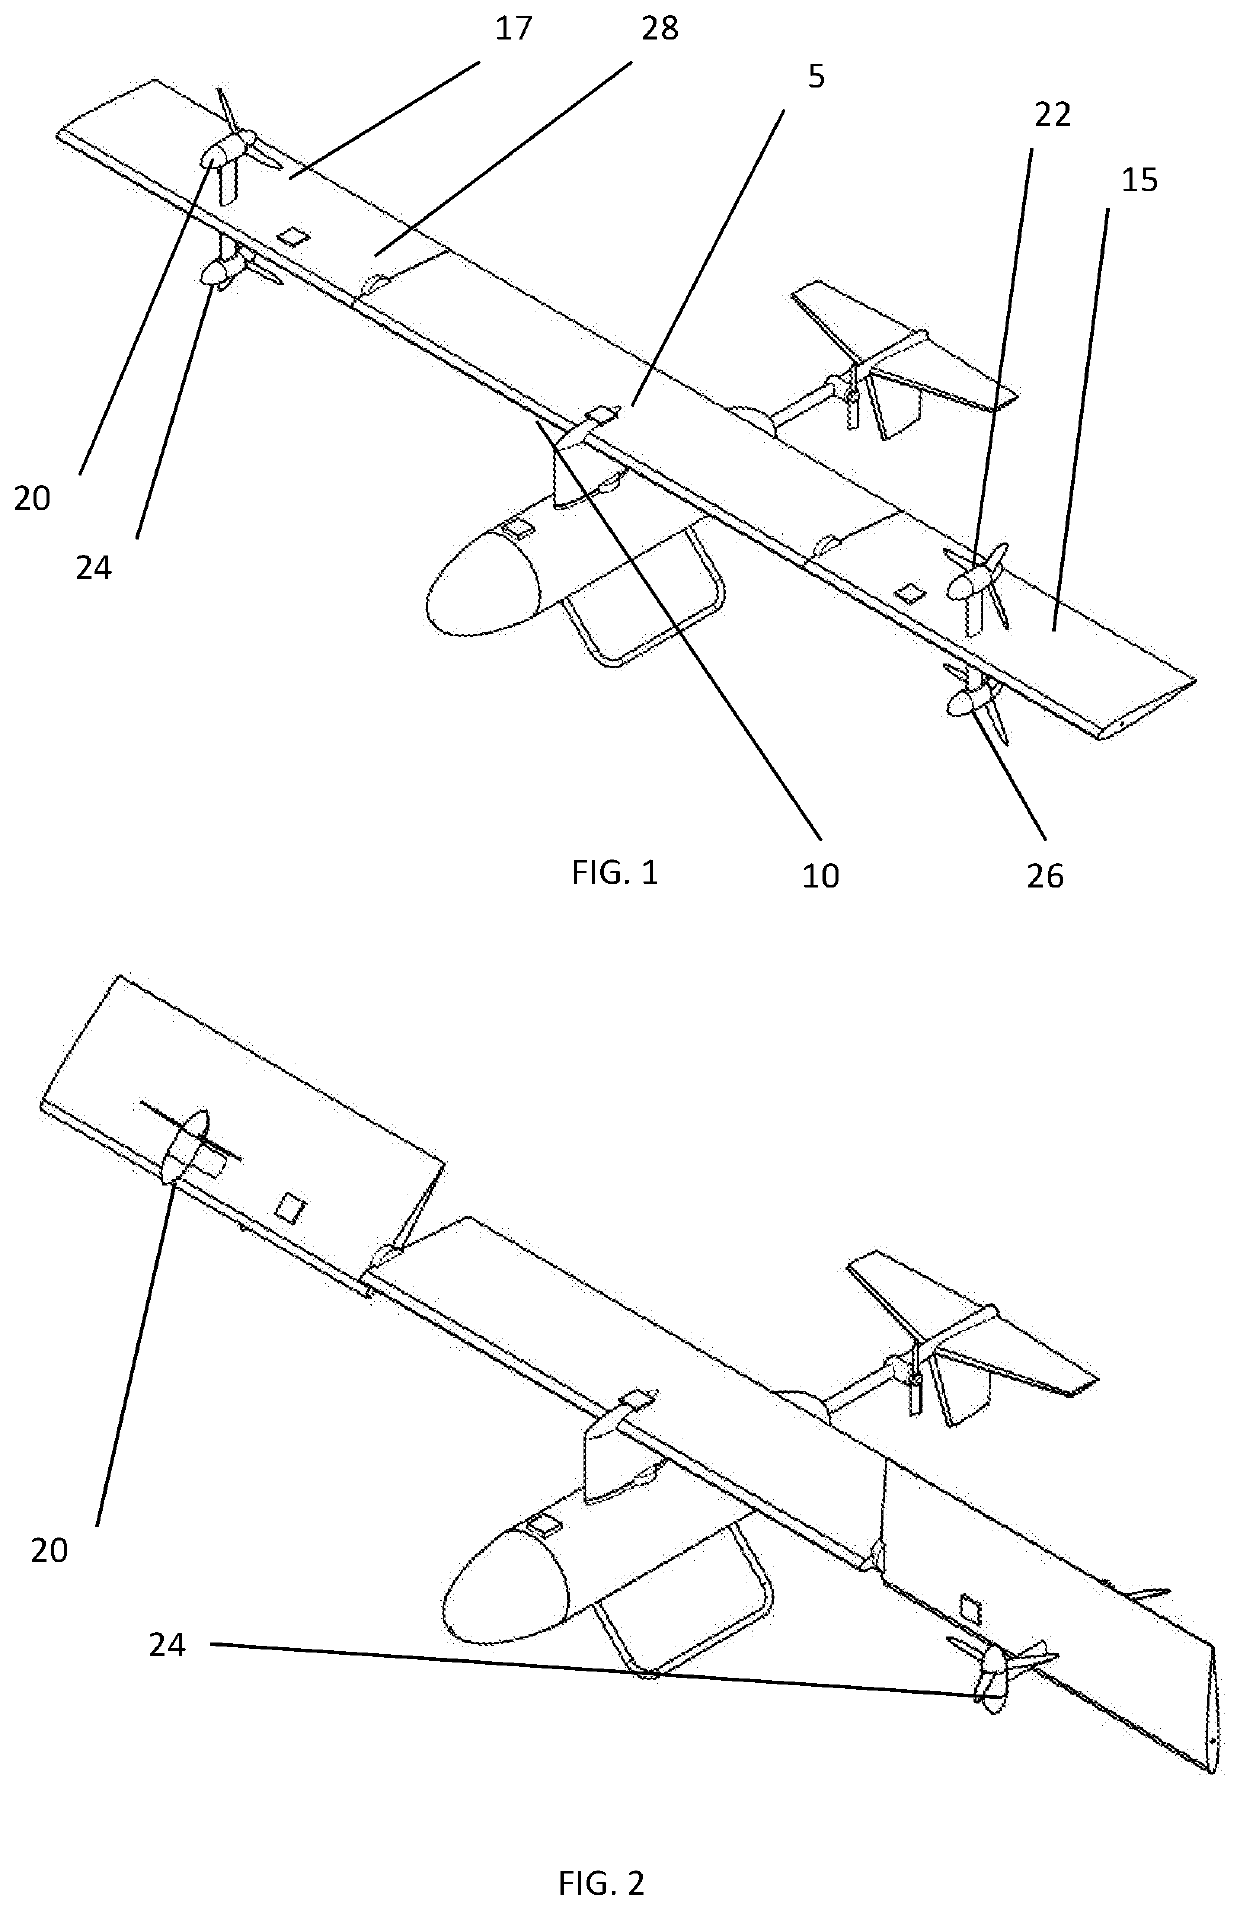 Pivoting wing system for vtol aircraft